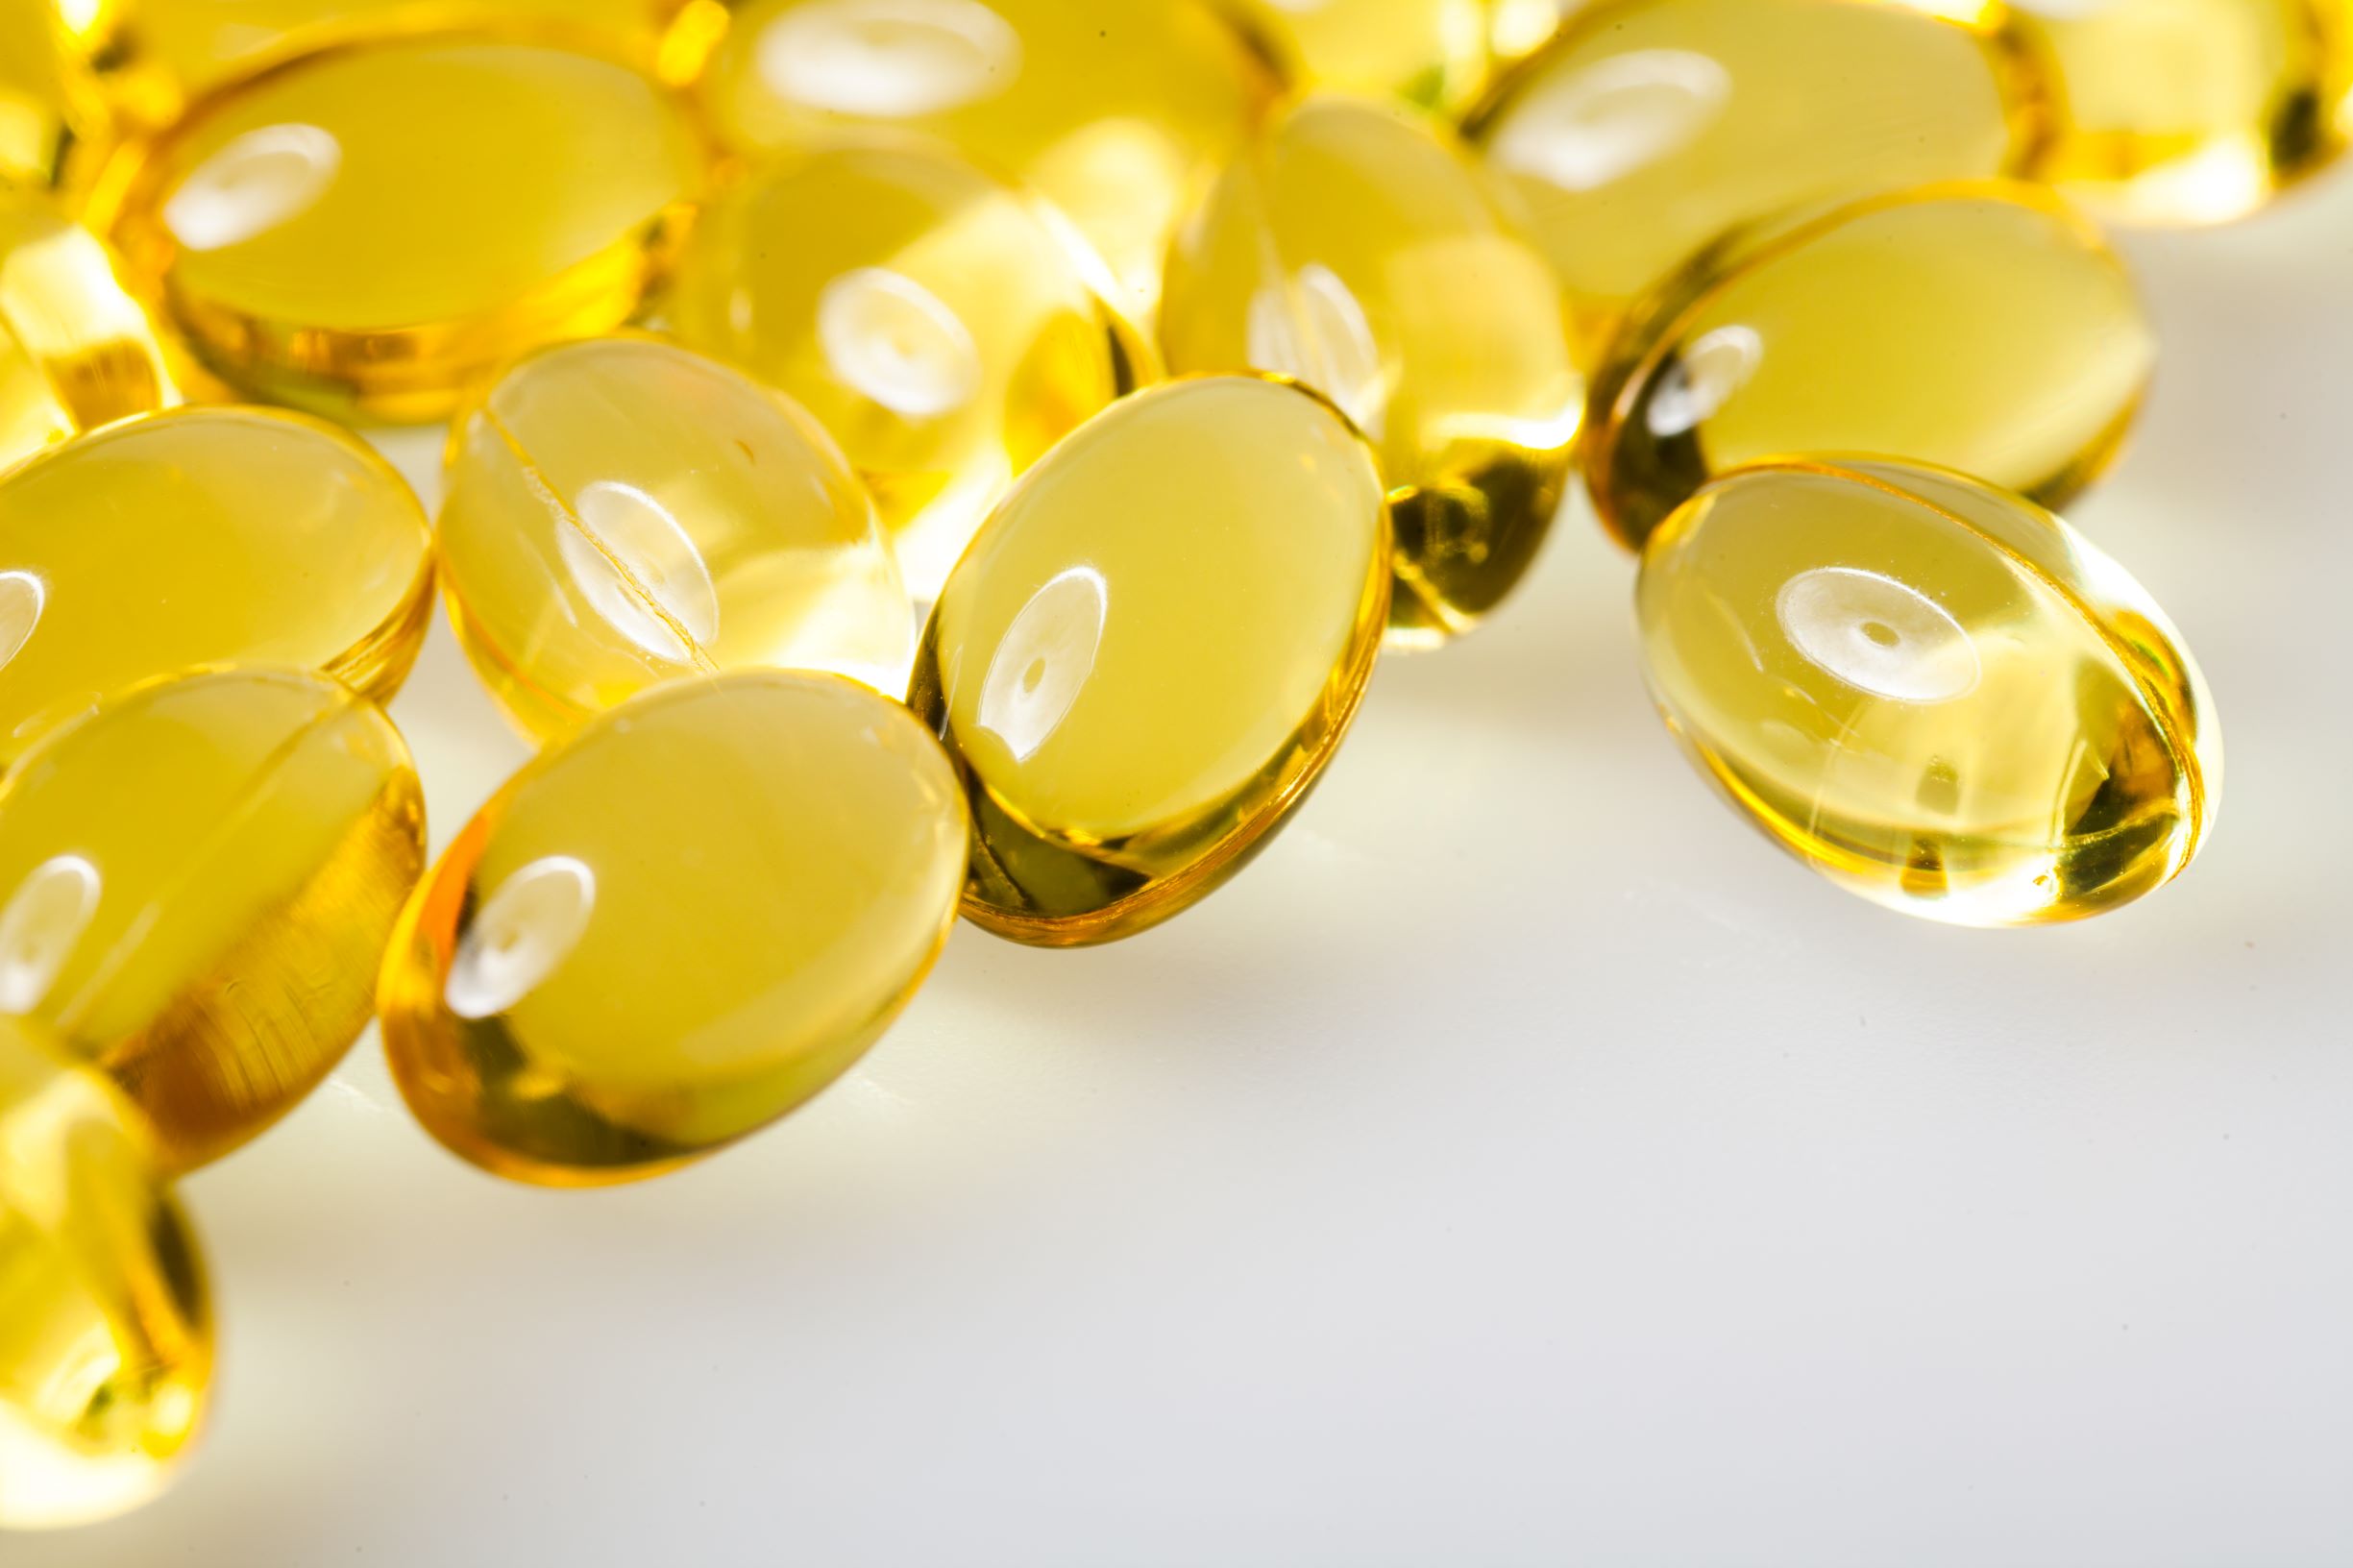 Vitamin E might help for Alzheimer's disease. Check the use, dosage, and testimonials.